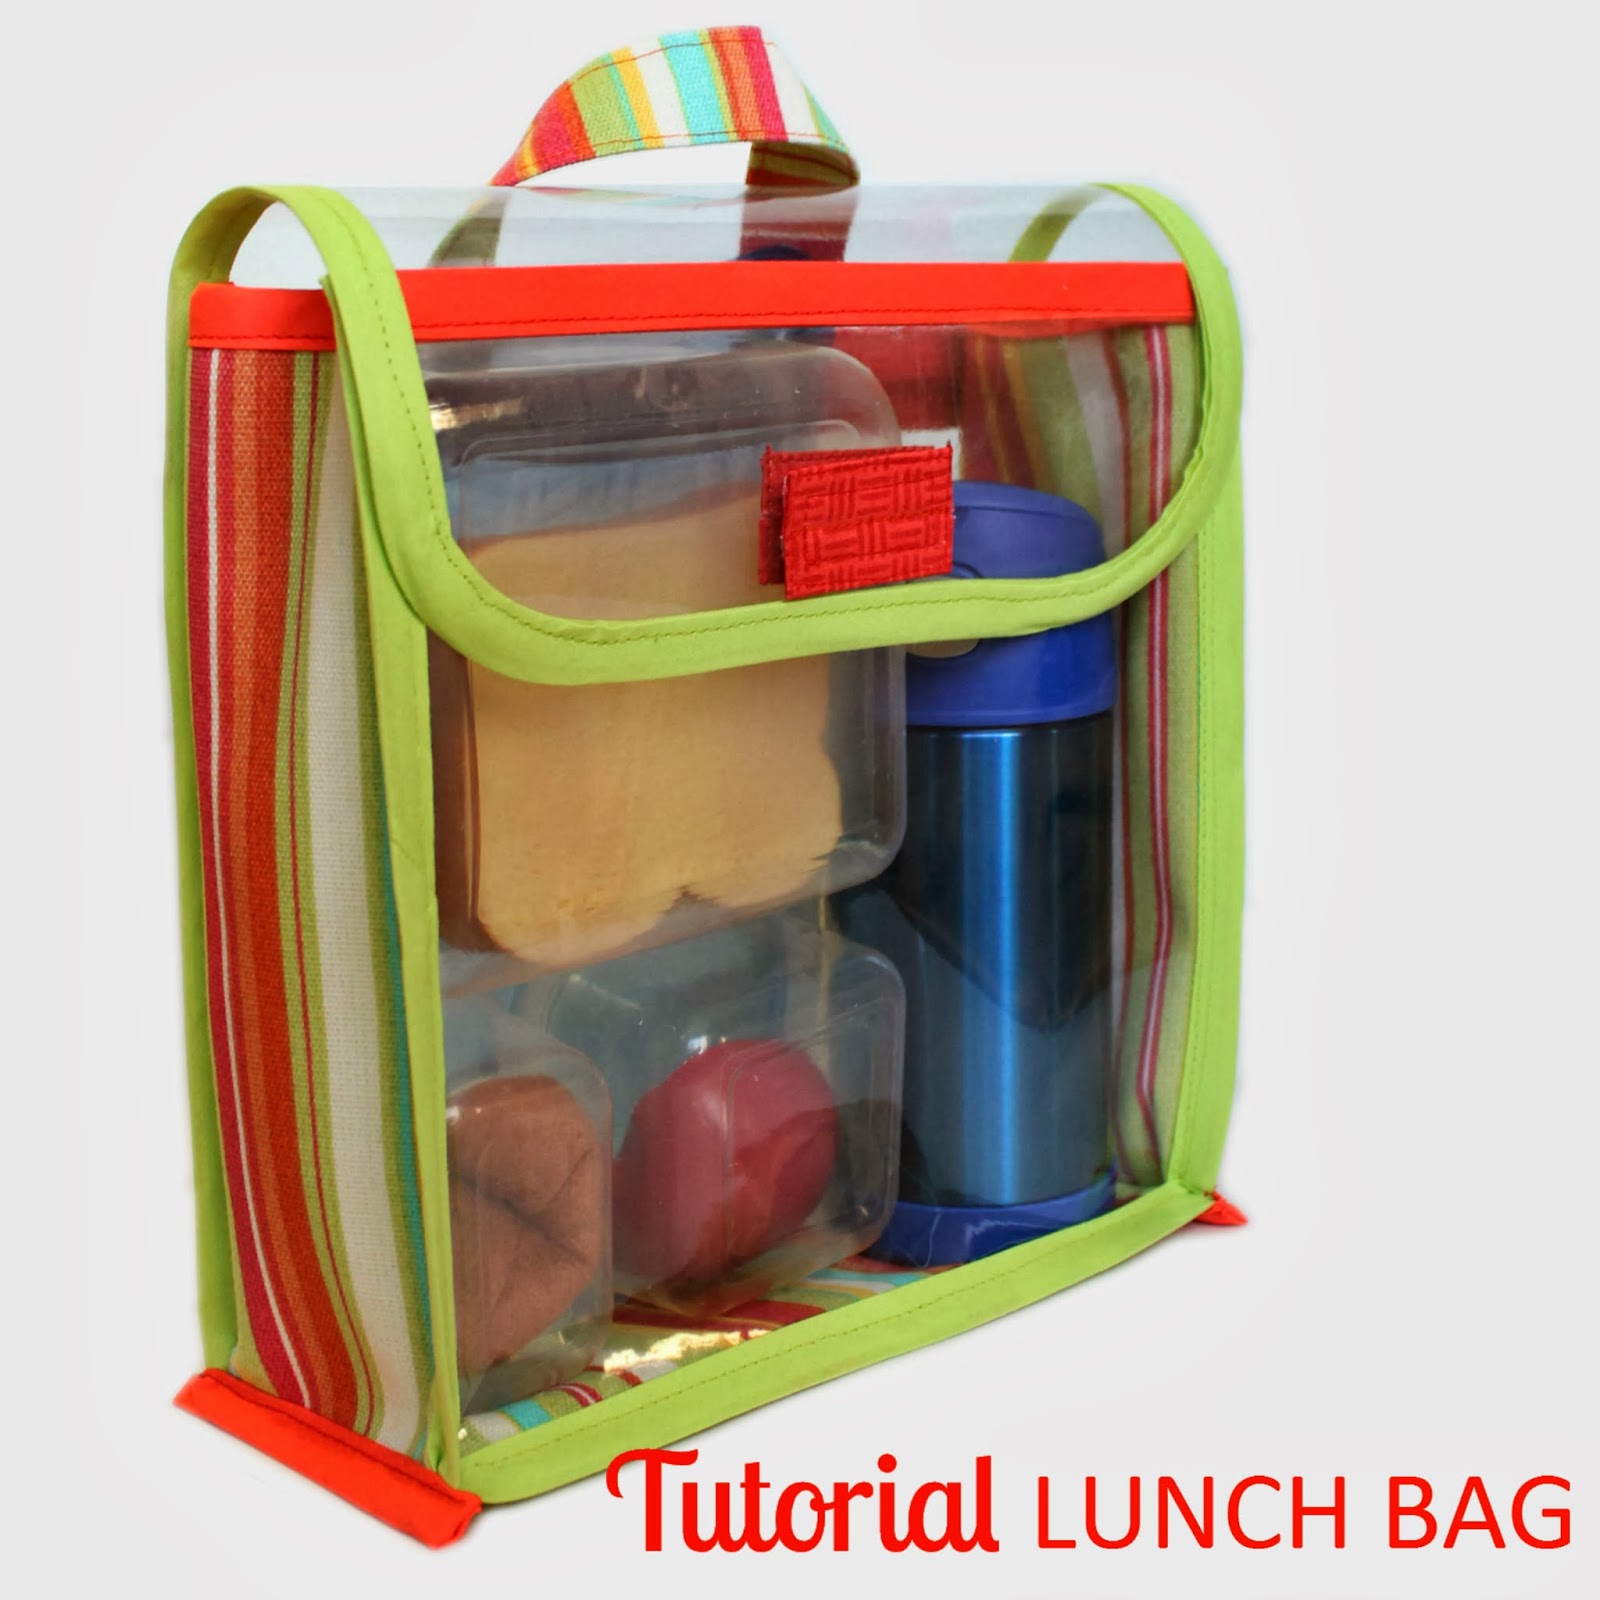 Tutorial: Vinyl Lunch Bag | Learn how to sew a simple to open, clear vinyl lunch bag. | The Inspired Wren